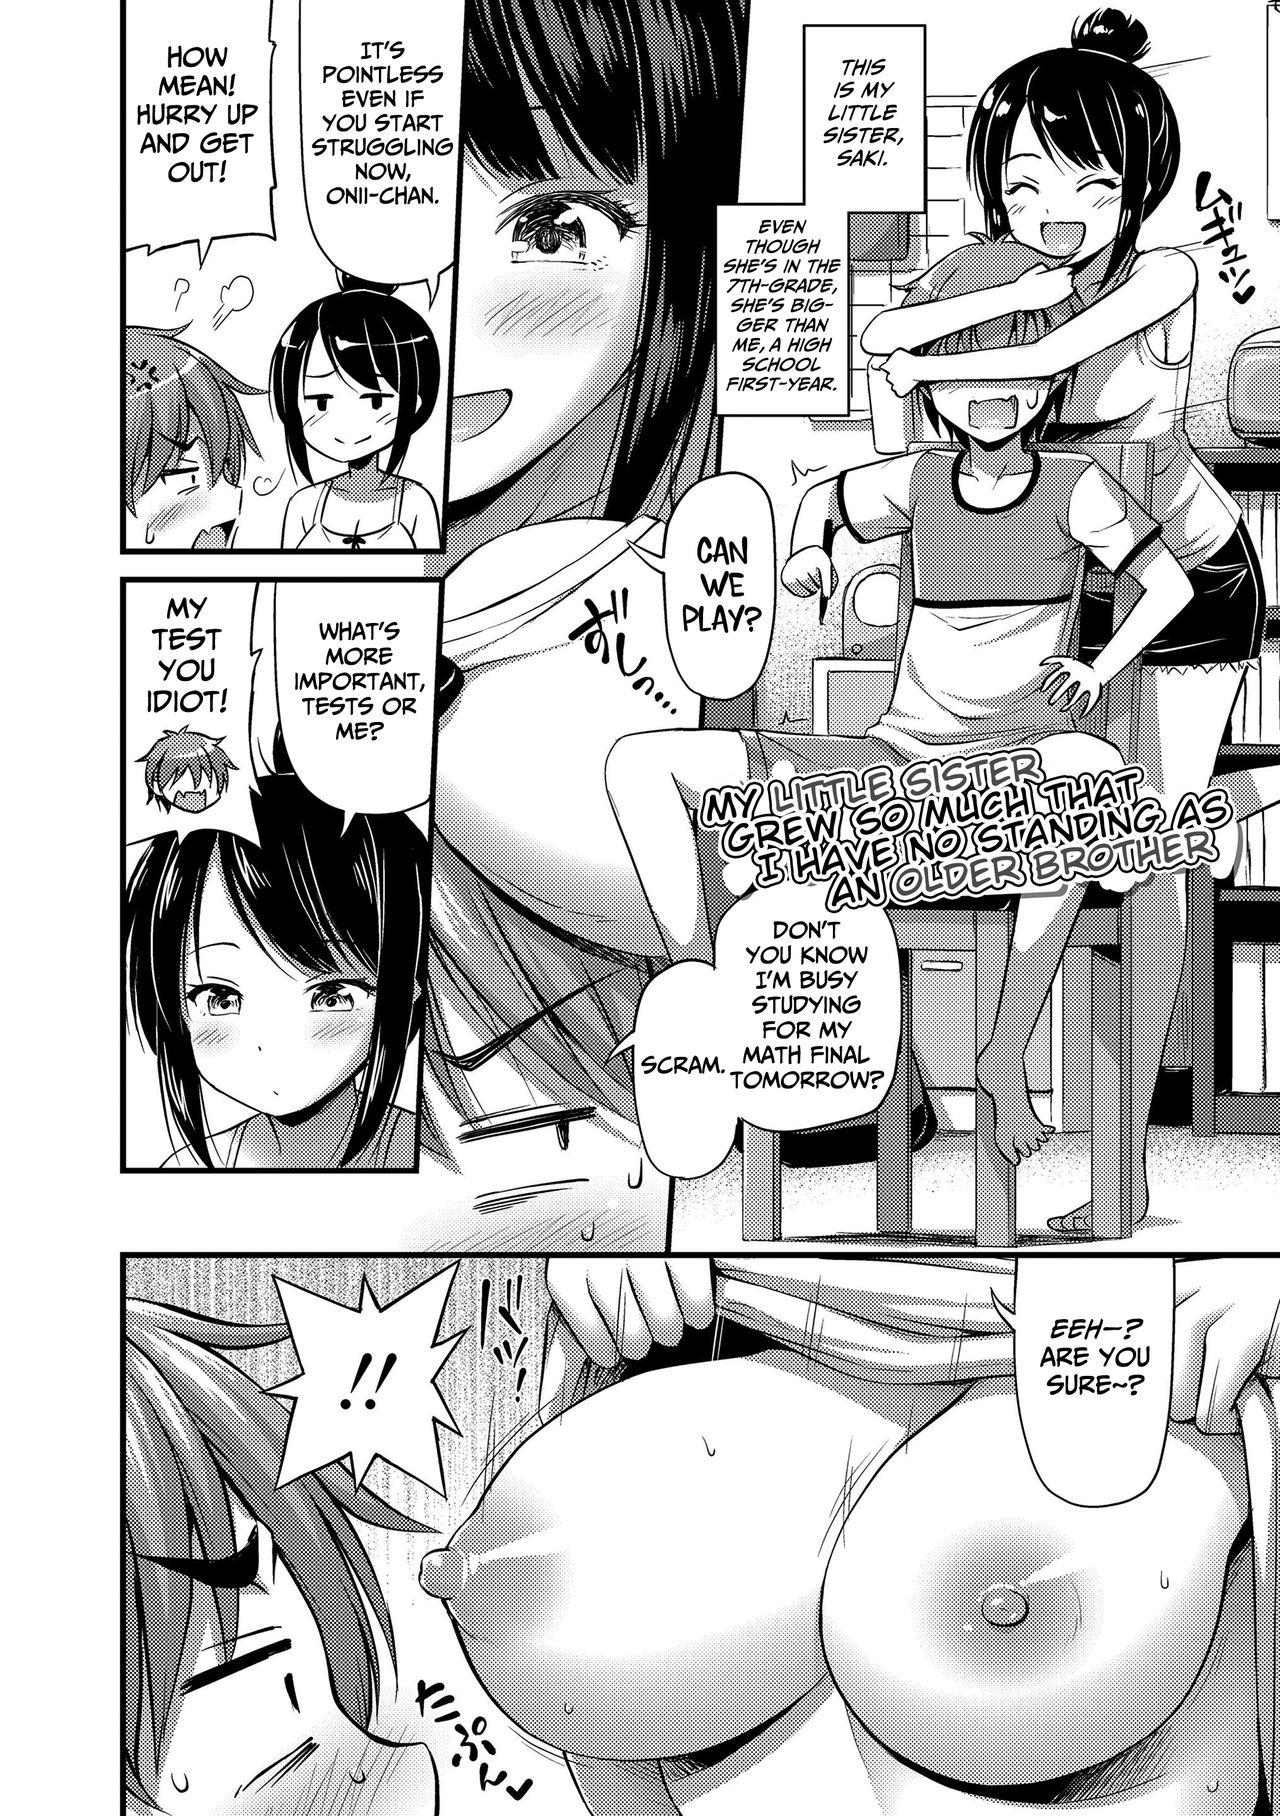 Goldenshower Imouto ga Sodachi Sugite Ani no Tachiba ga Nai | My Little Sister Grew So Much That I Have No Standing as an Older Brother Outdoors - Page 2